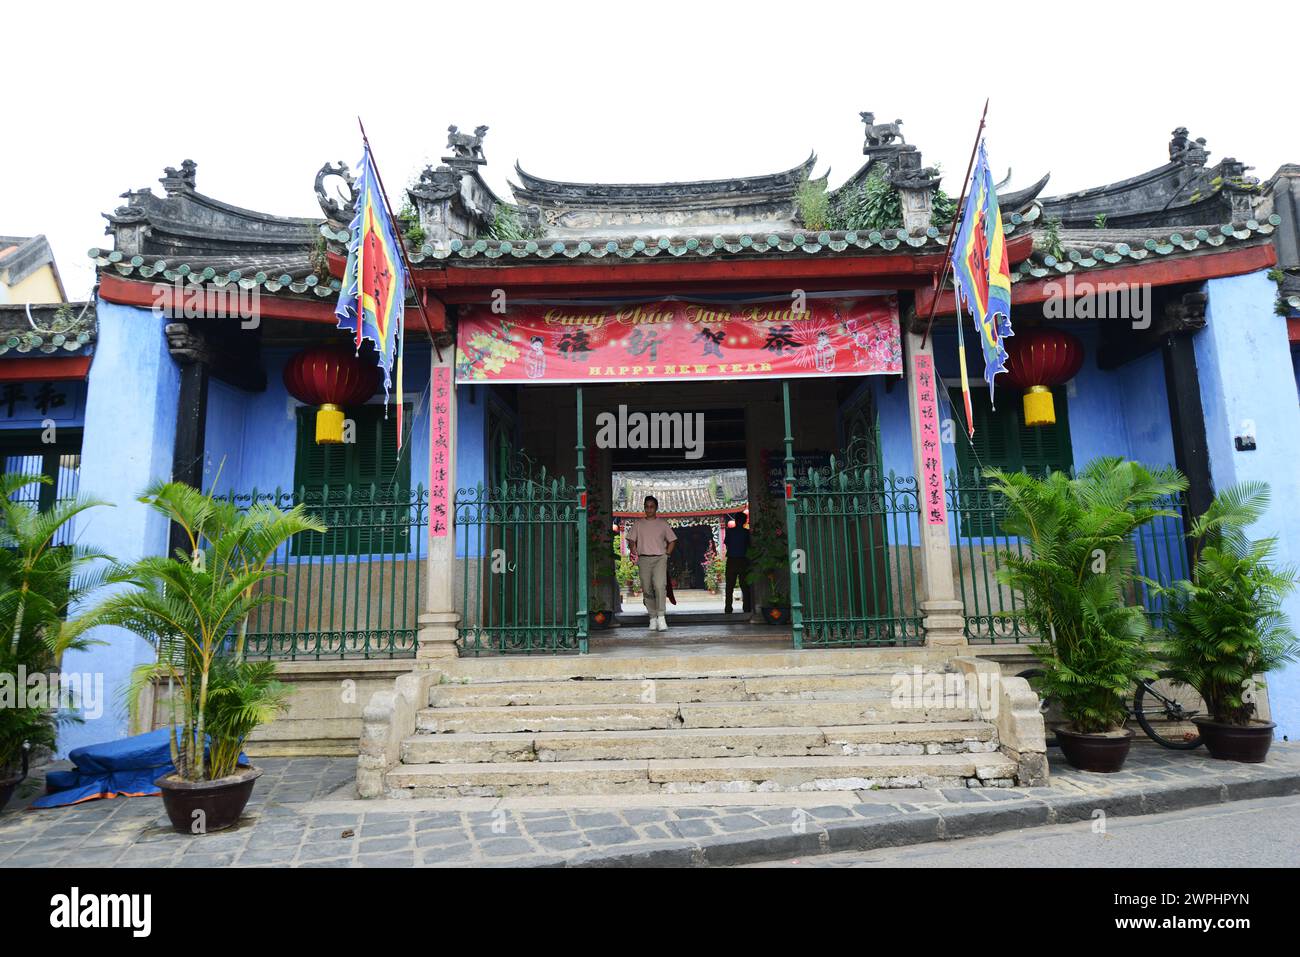 Hoa Van Le Nghia Buddhist temple in the old town of Hoi An, Vietnam. Stock Photo